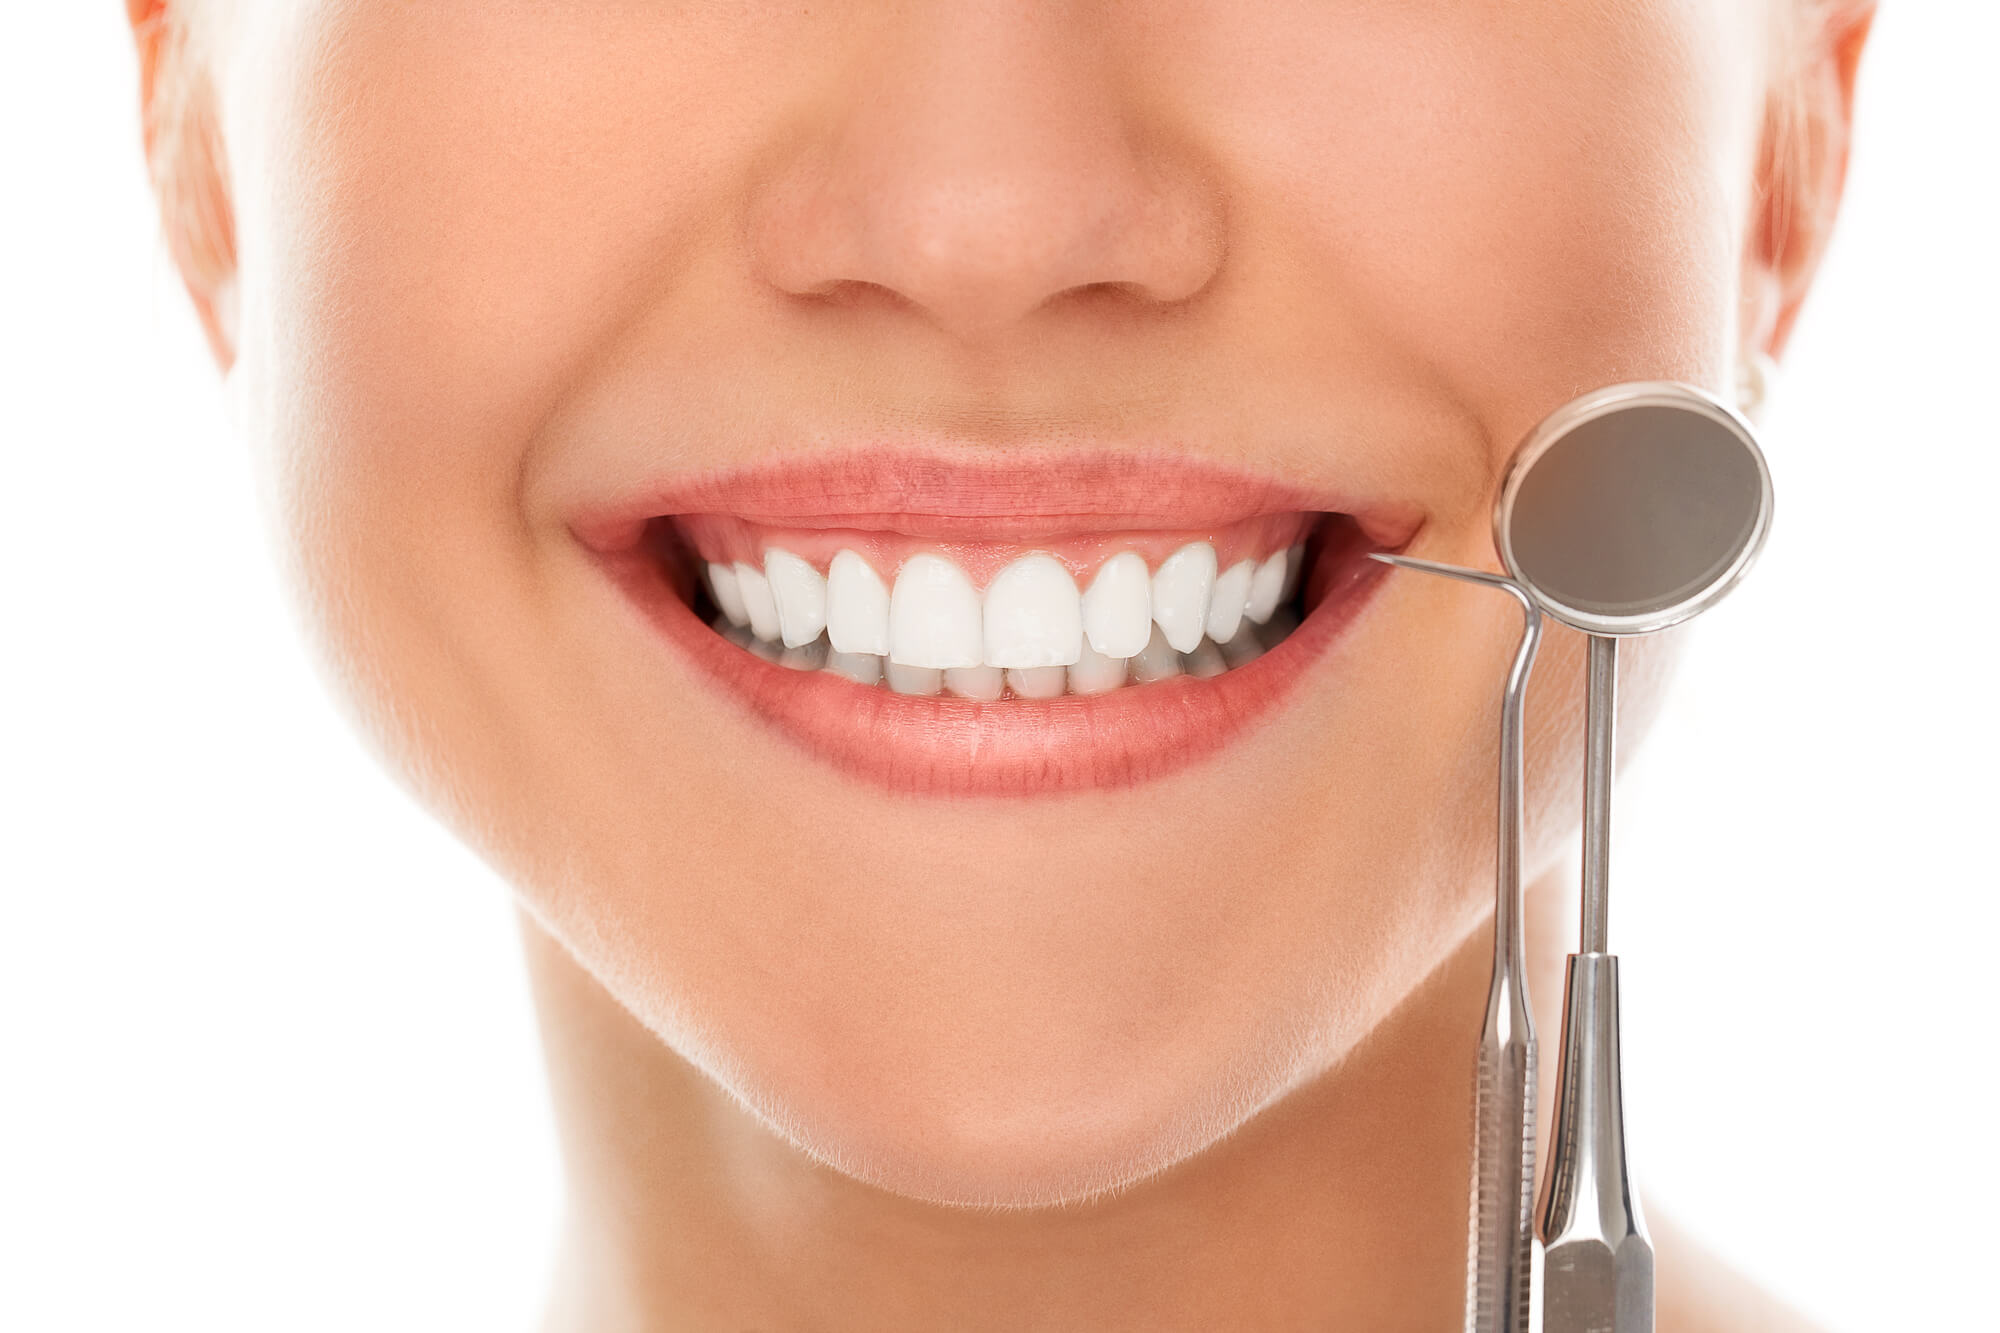 who offers the best west miami dentist?